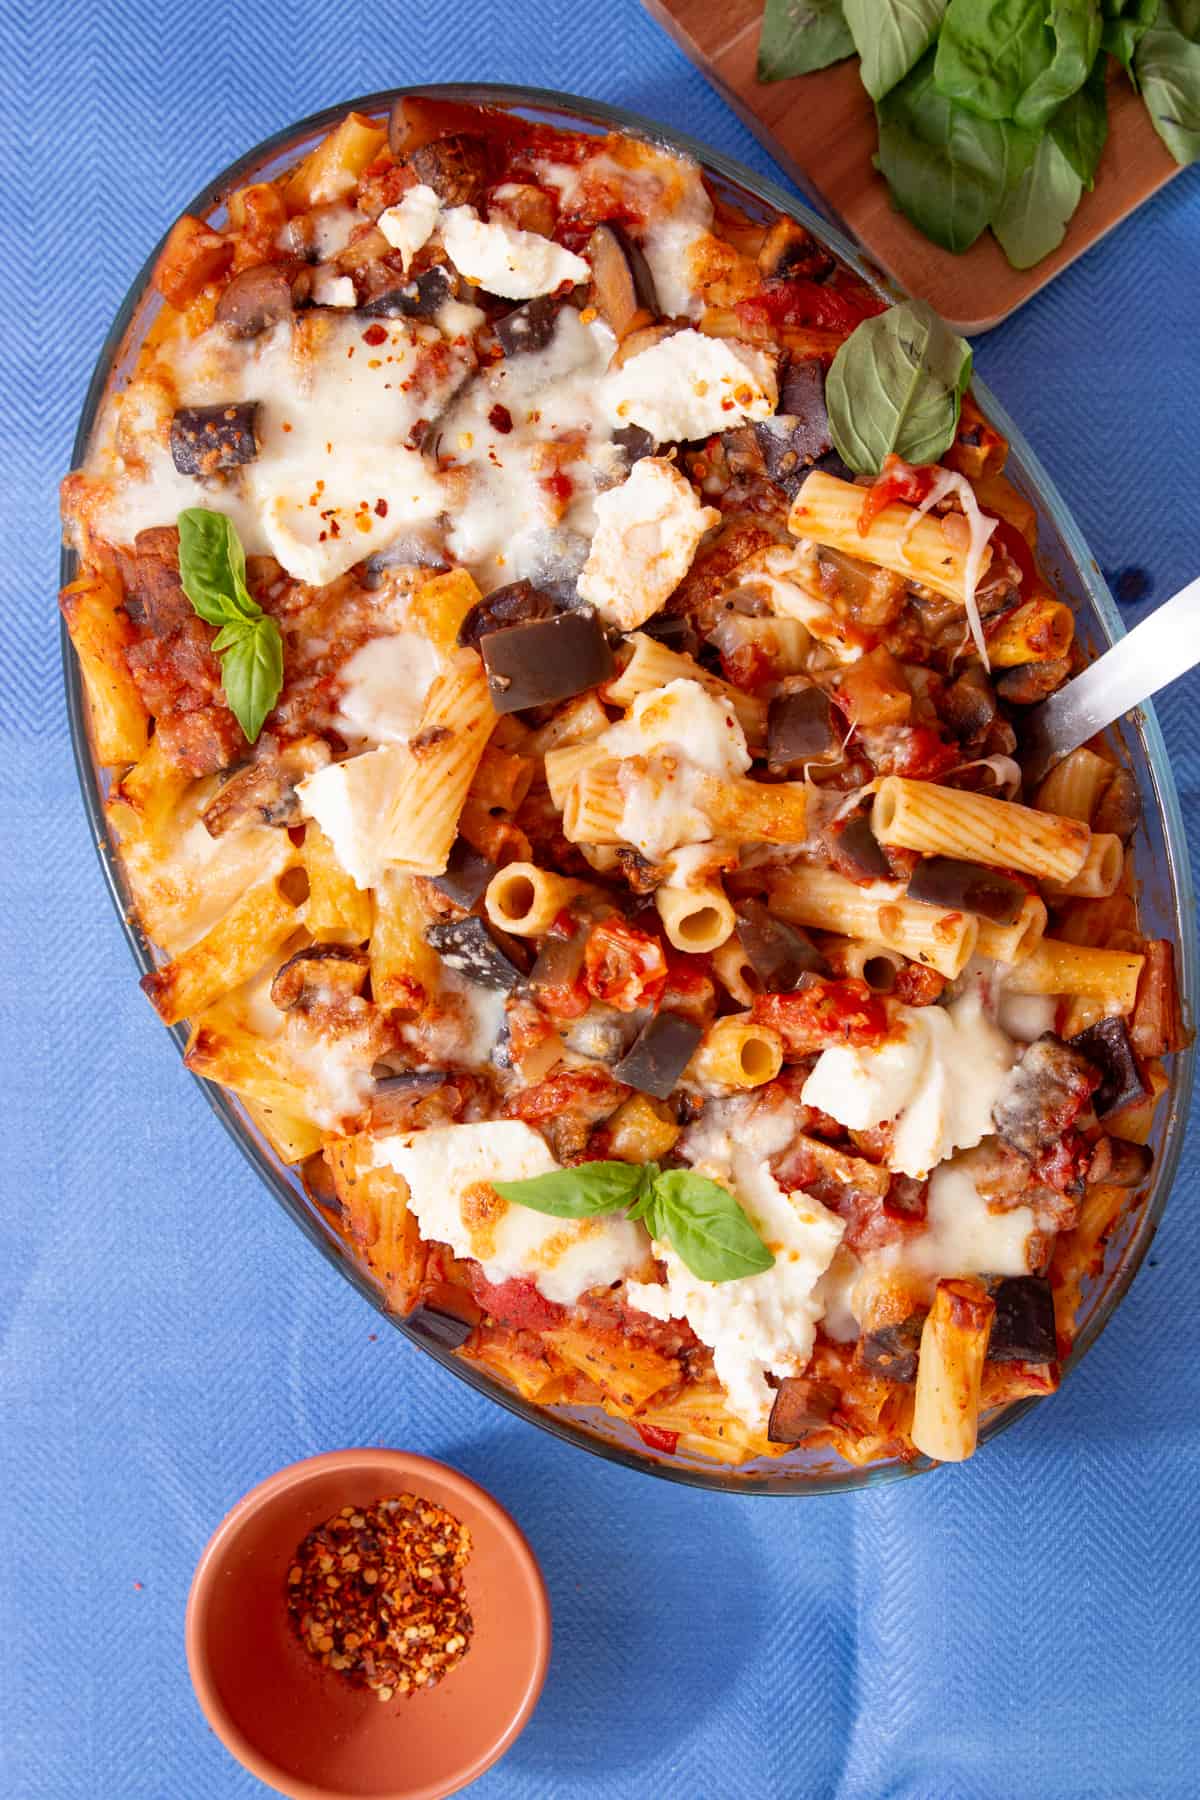 Overhead shot of of cooked rigatoni pasta with vegetables and melted cheese and tomato in an oval, glass bowl with fresh basil leaves as garnish and on a board behind the dish.